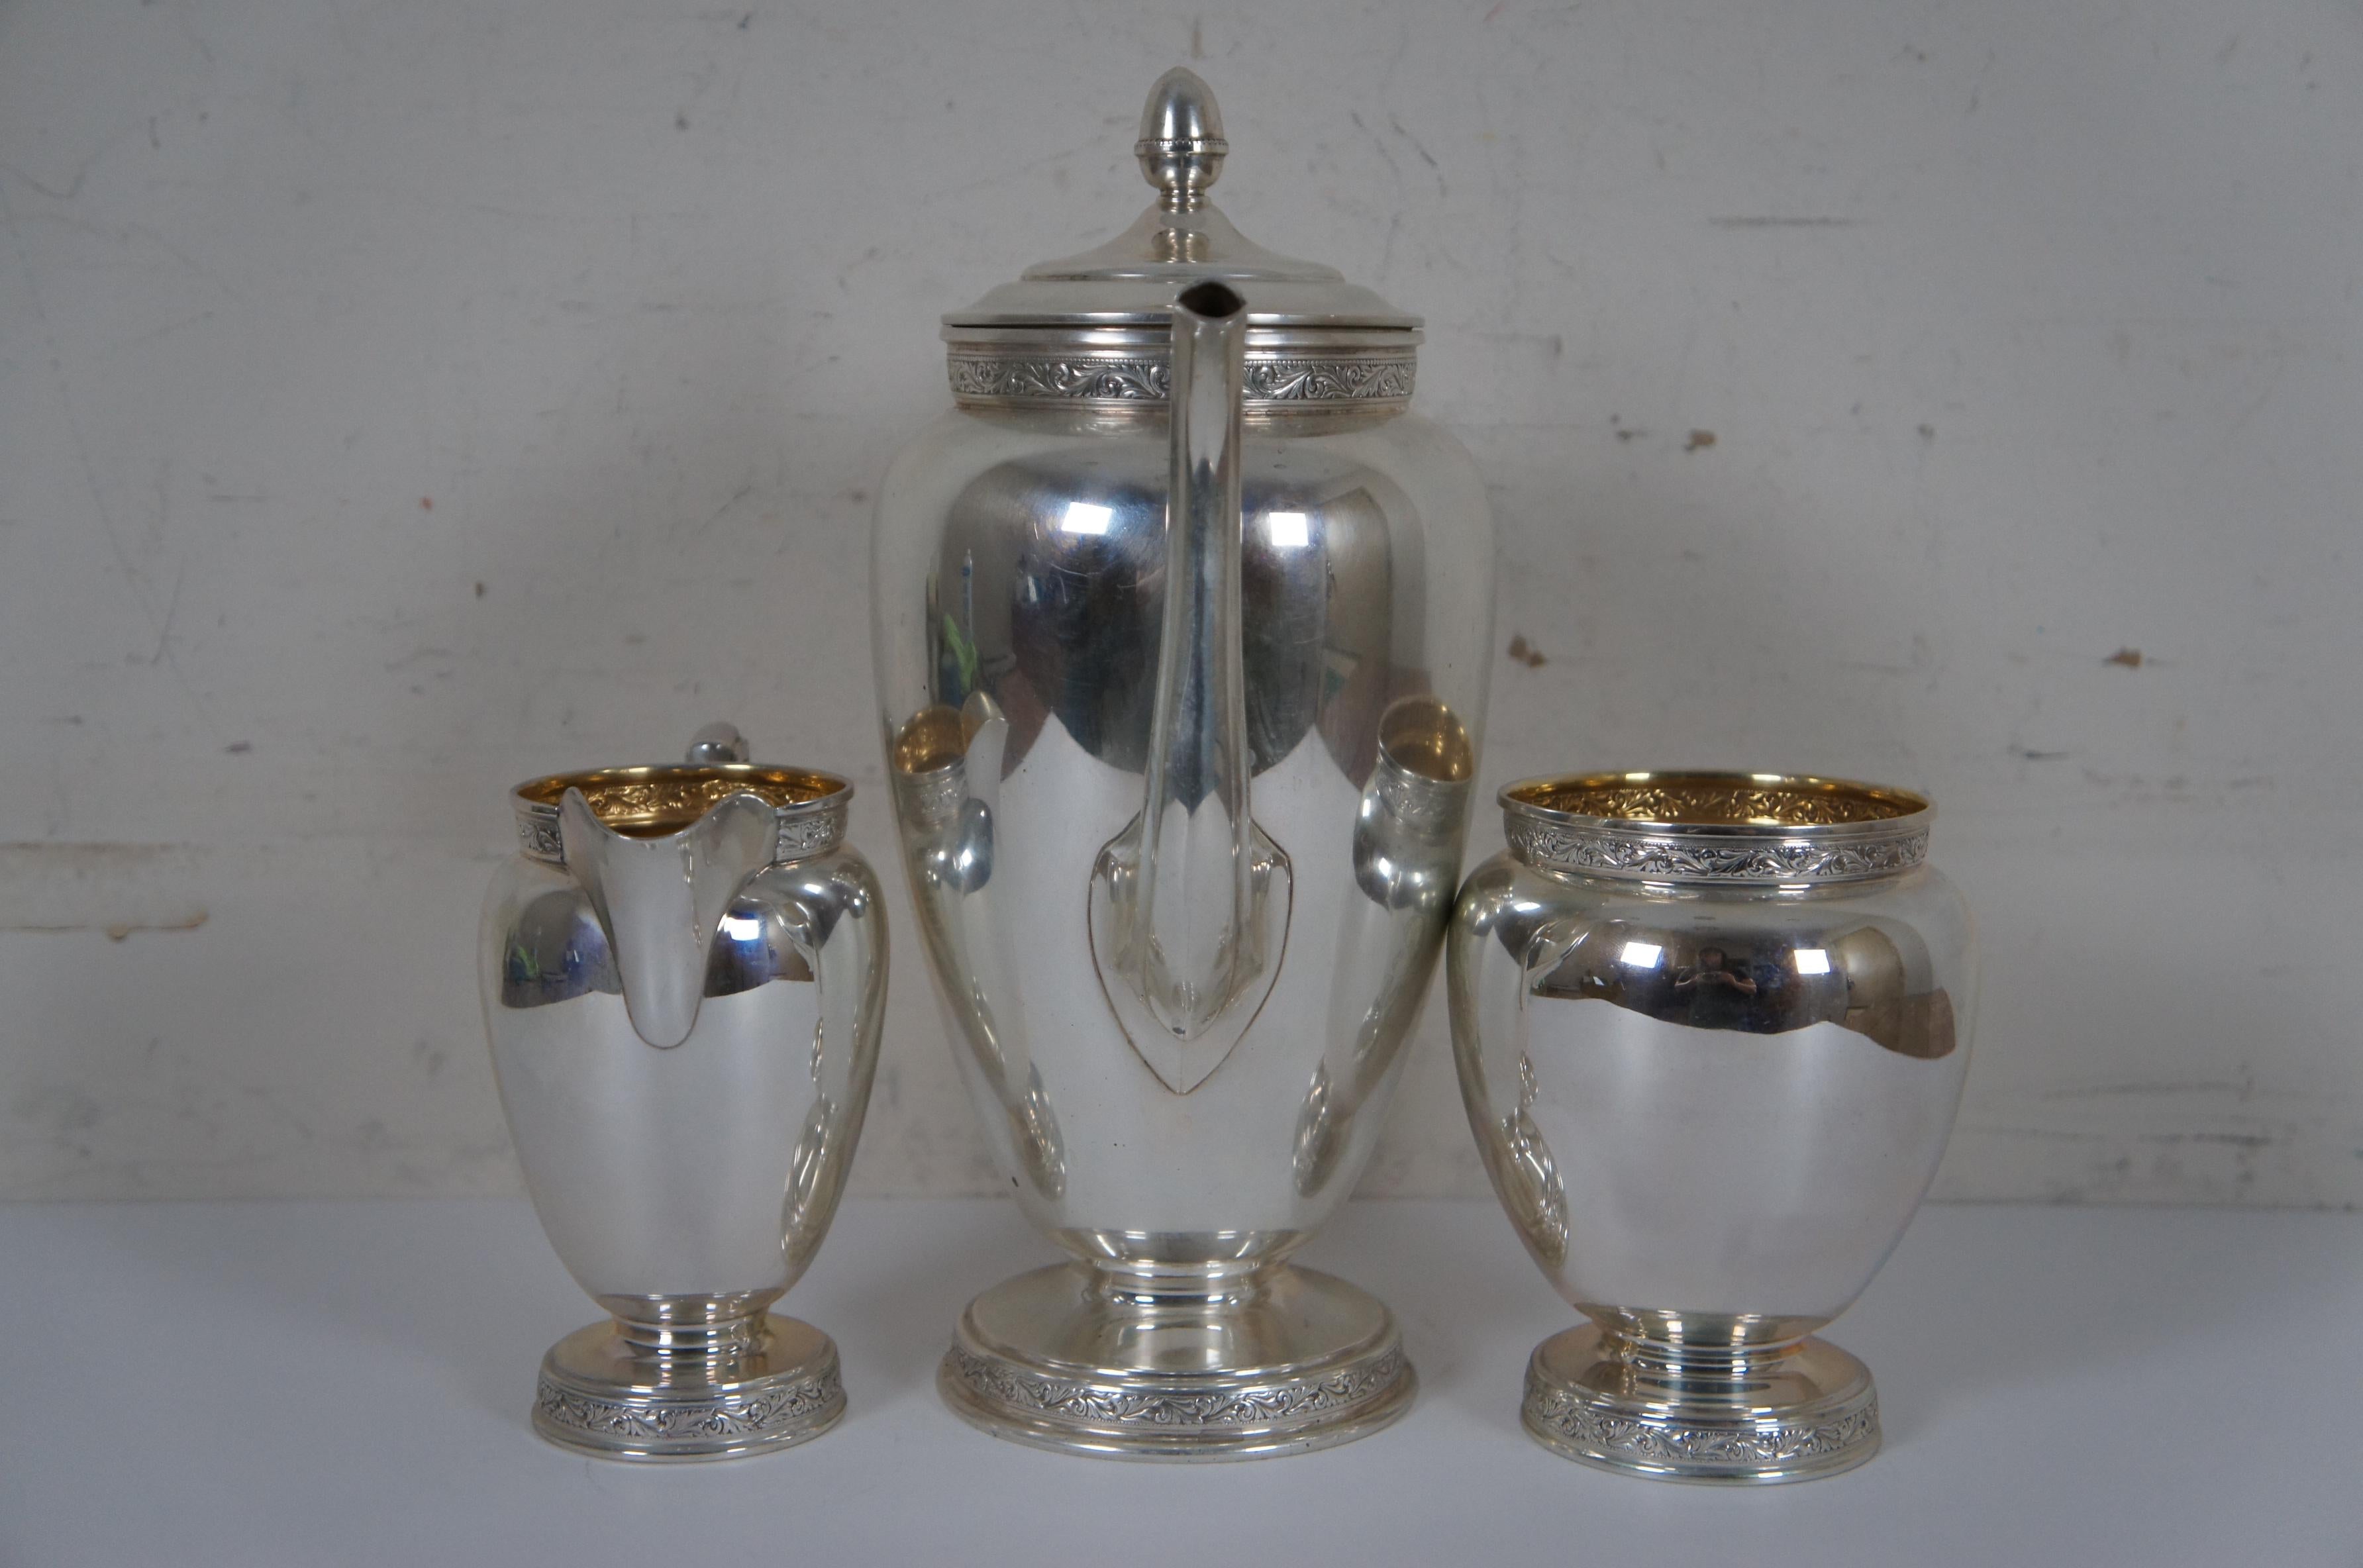 1936 Antique 3pc Reed & Barton X610 Sterling Silver Tea Coffee Serving Set 1194g In Good Condition For Sale In Dayton, OH